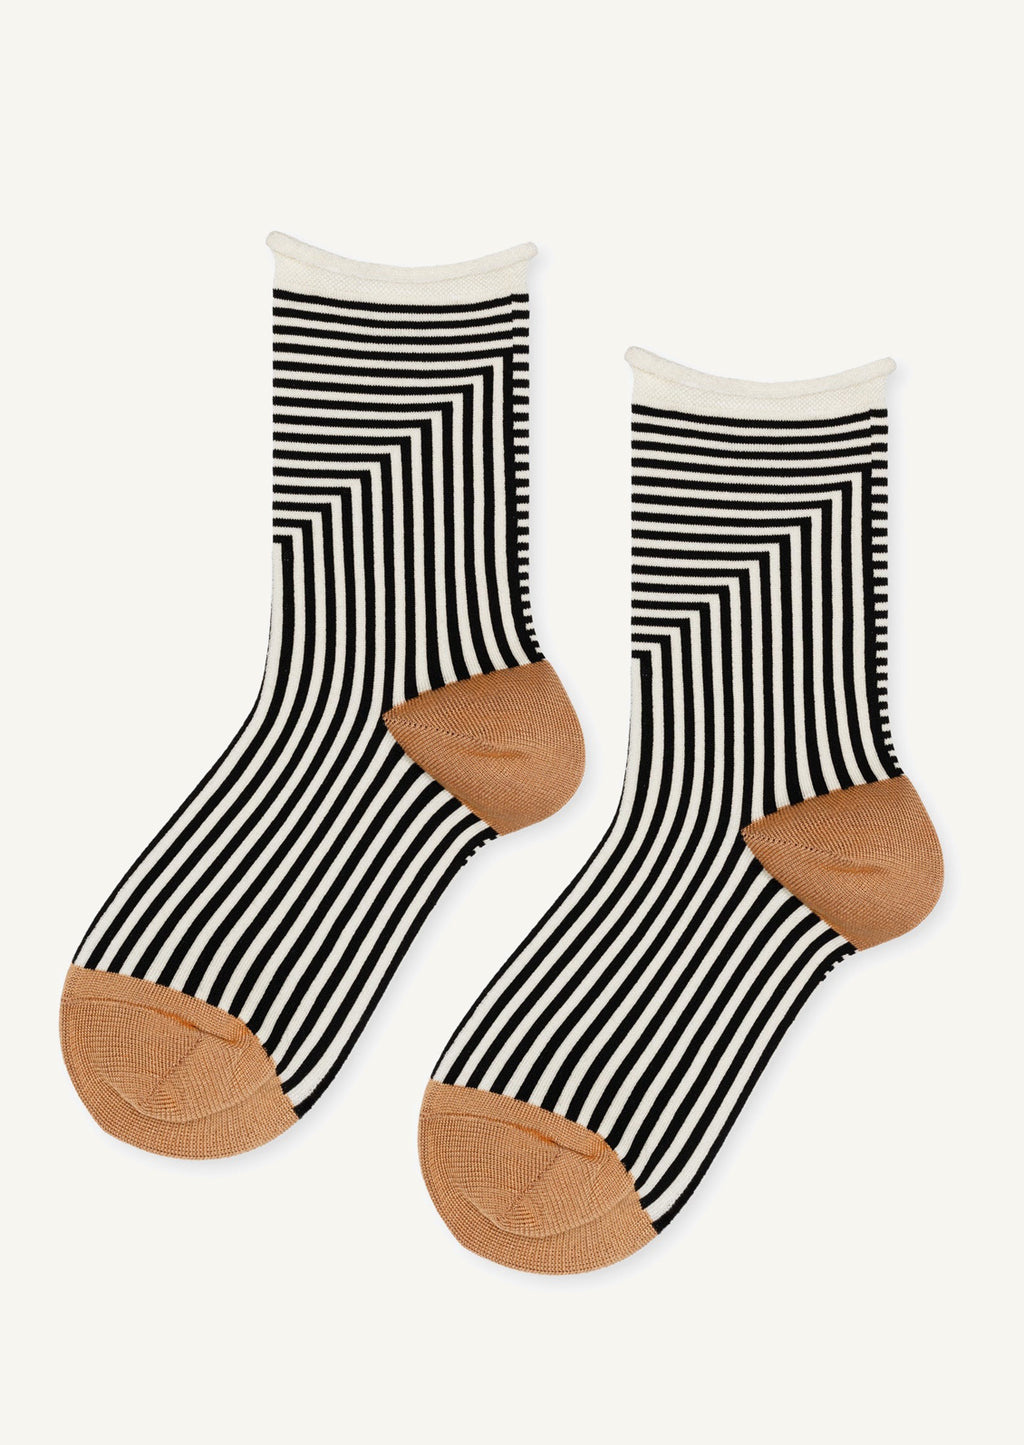 1: Black and white geo stripe socks with camel colored contrast.